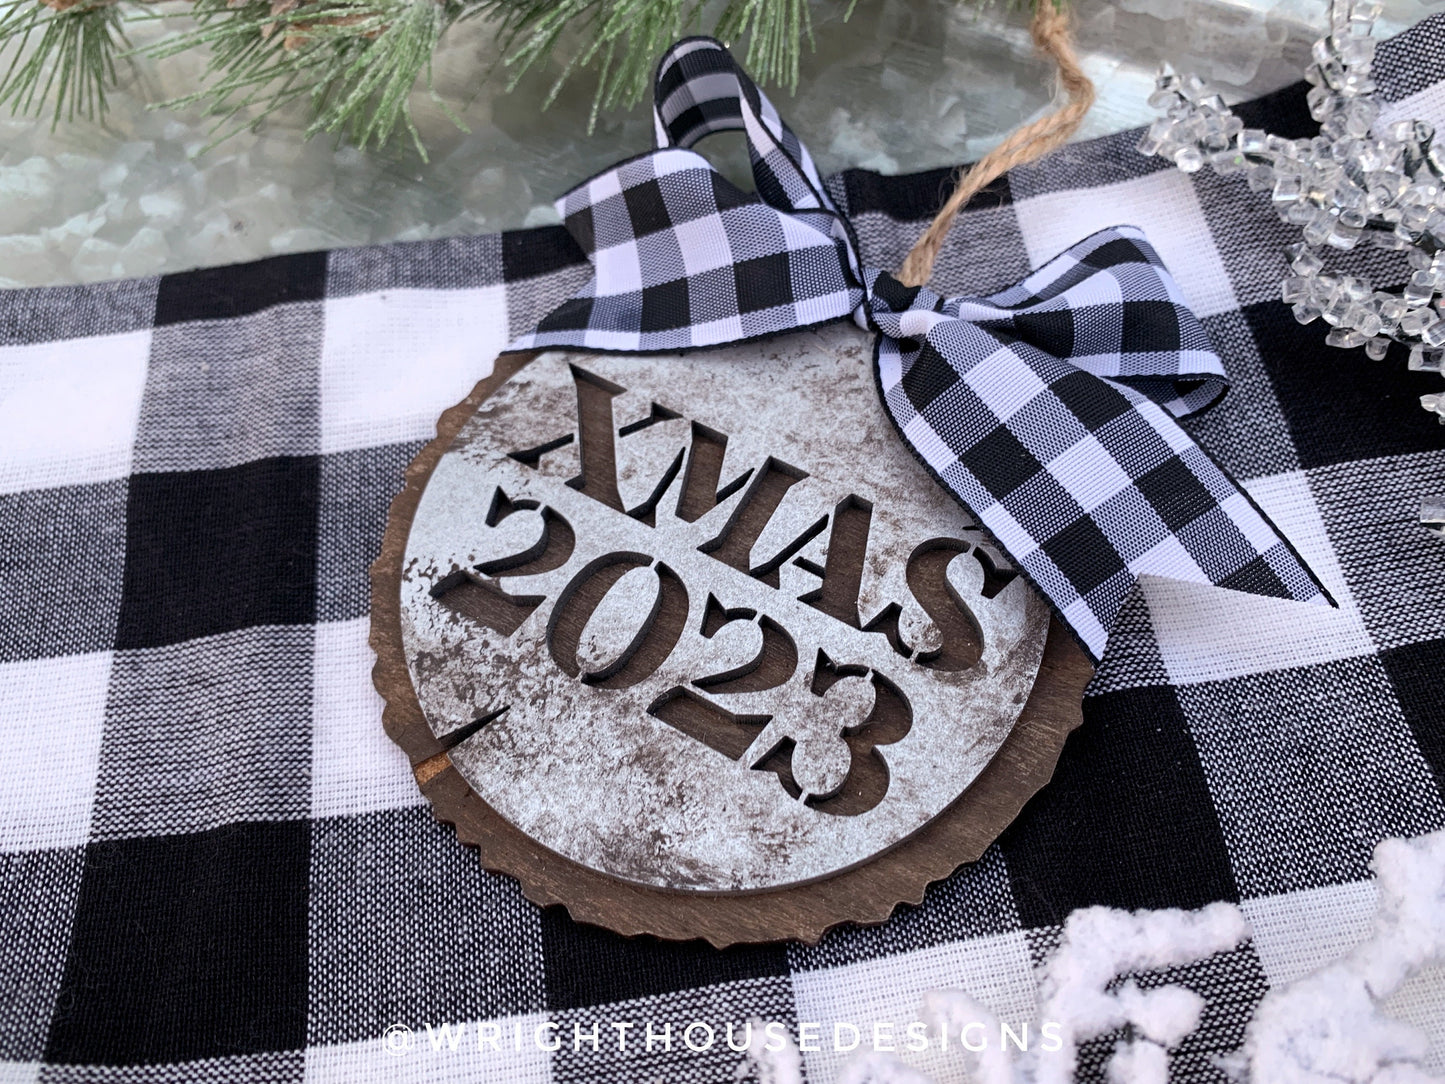 2023 Rustic Farmhouse Galvanized Cookie Tree Ornament - Yearly Ornament - Stencil Wood Slice - Ski Lodge Style Ornament and Stocking Tag